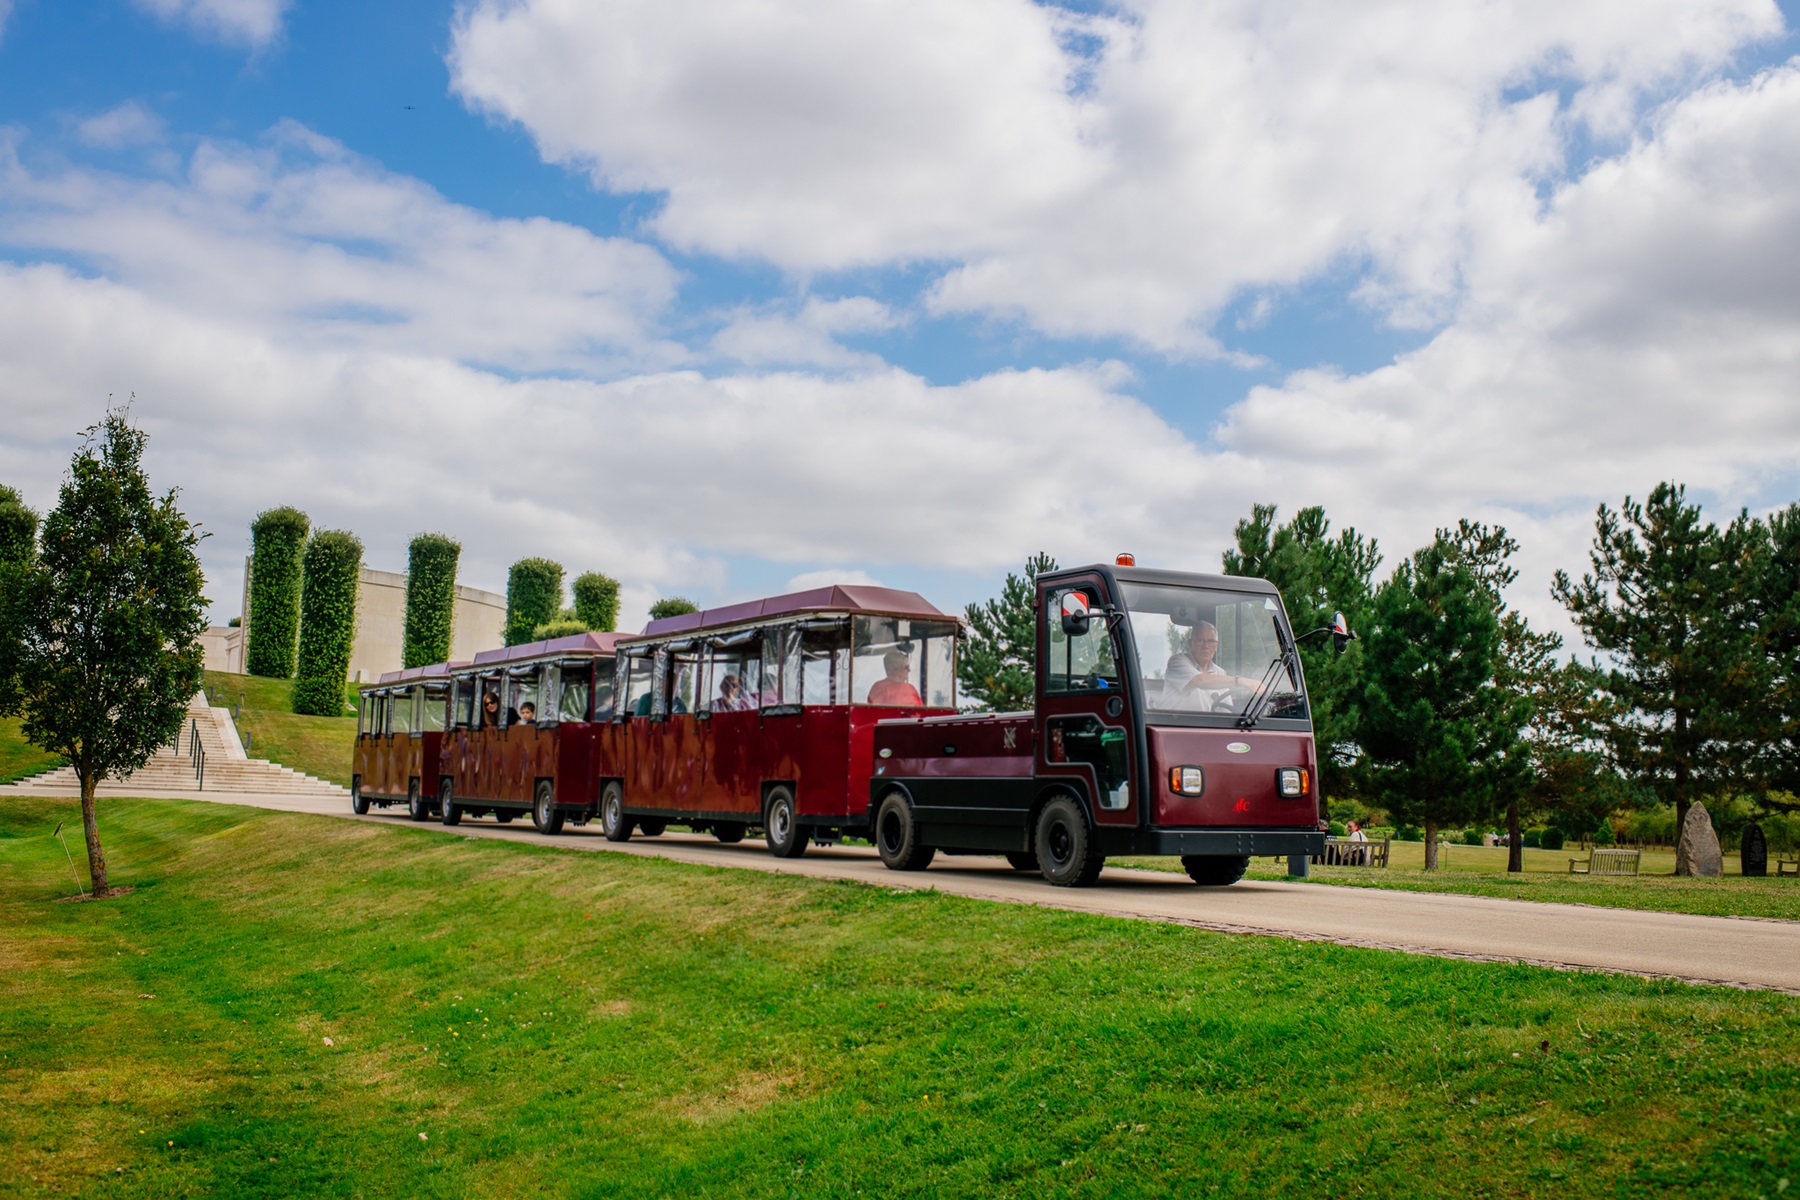 Land Train on its route past the Armed Forces Memorial